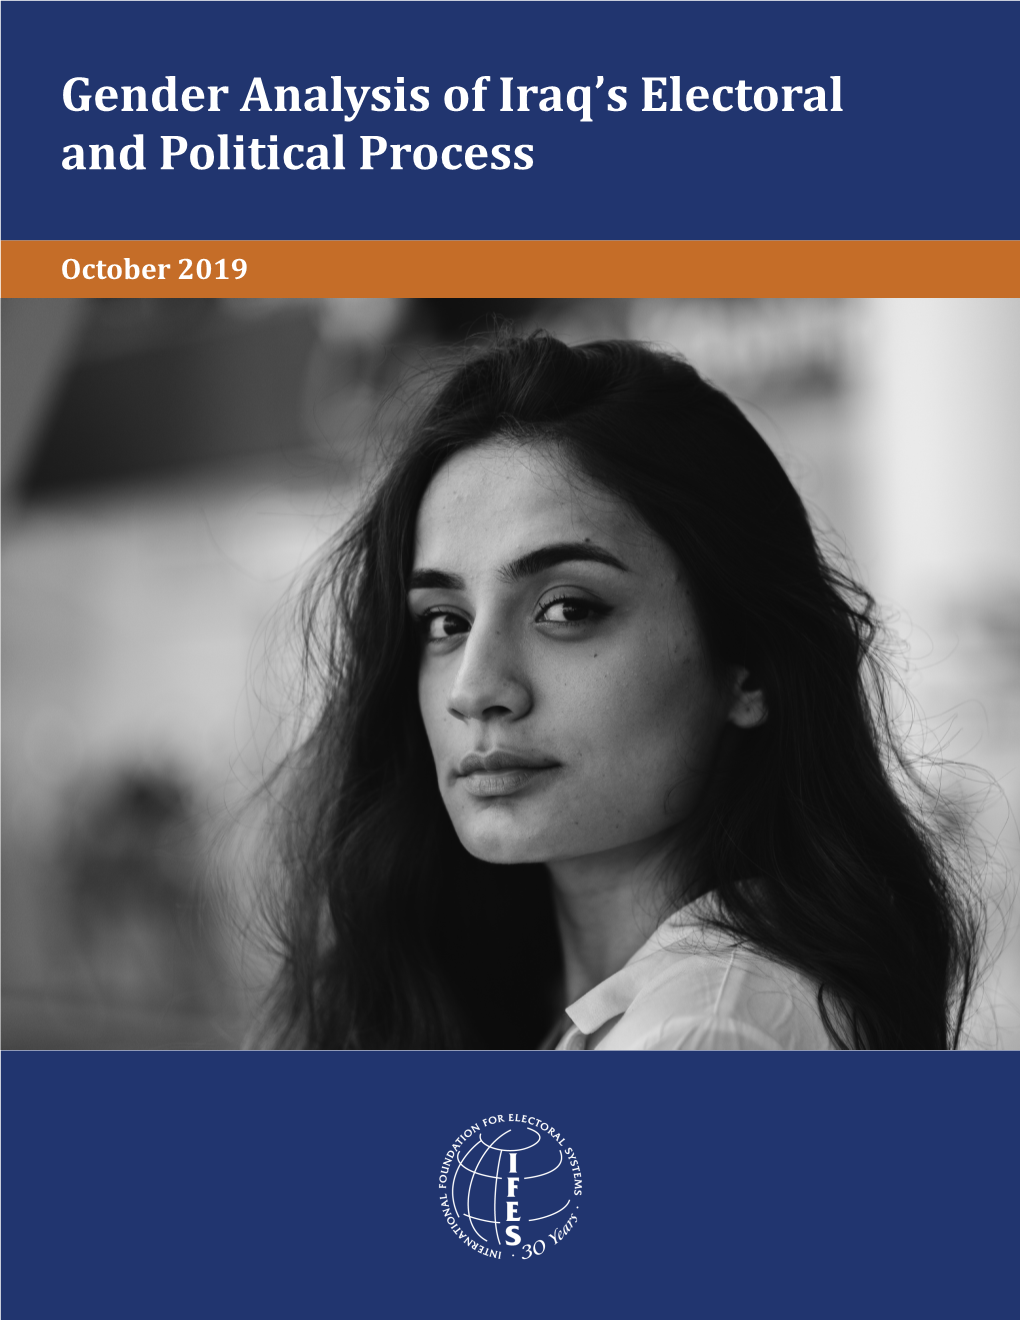 'Gender Analysis of Iraq's Electoral and Political Process'